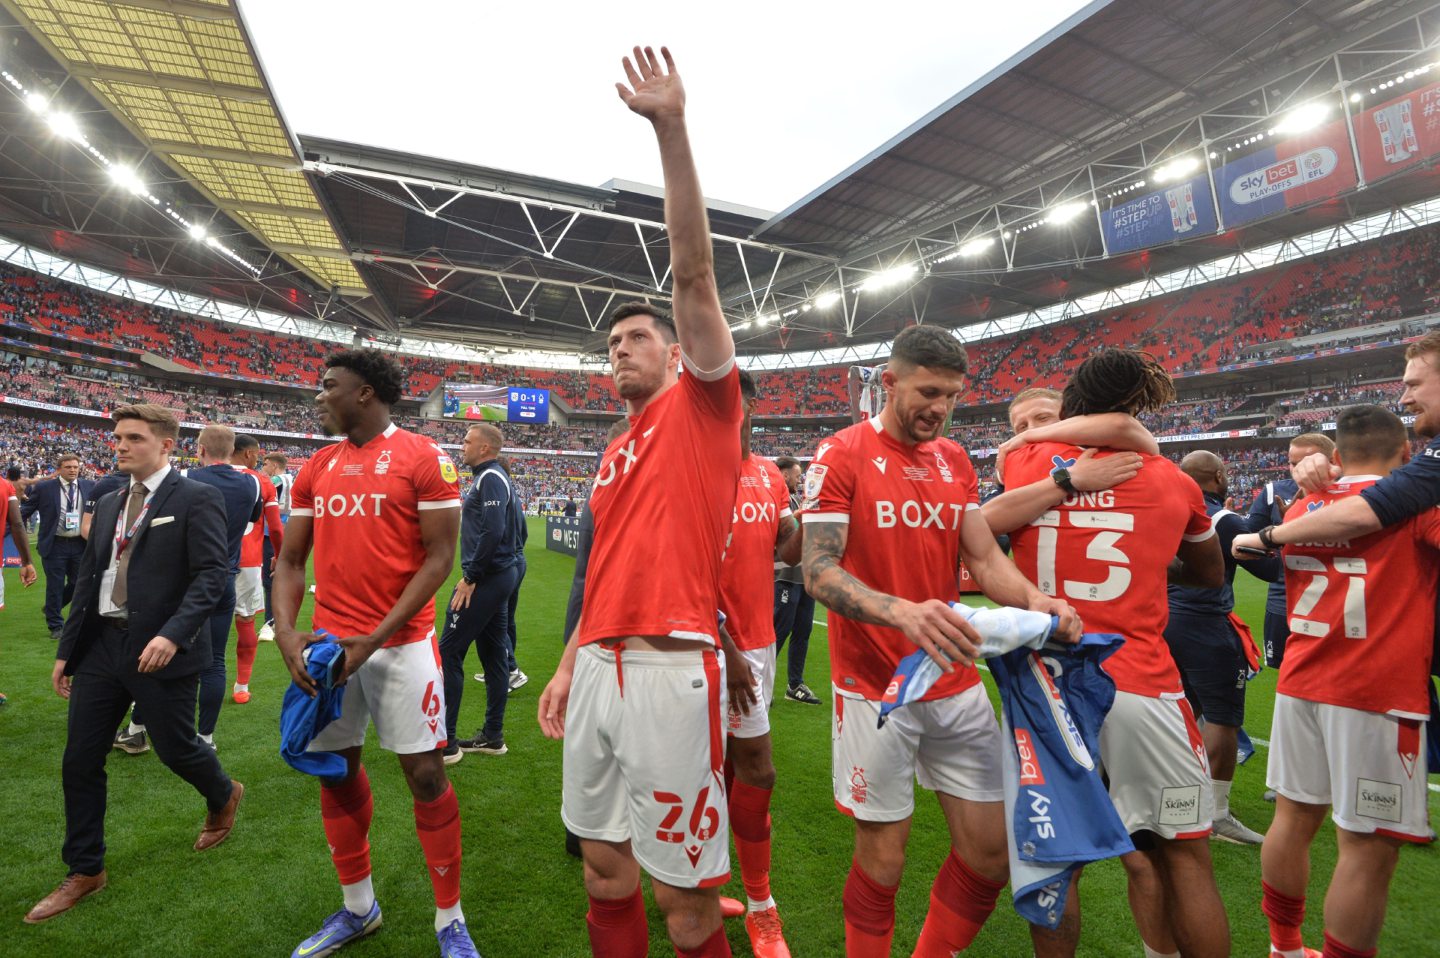 Scott McKenna of Nottingham Forest was man of the match in the play-off final defeat of Huddersfield at Wembley. Image: Shutterstock